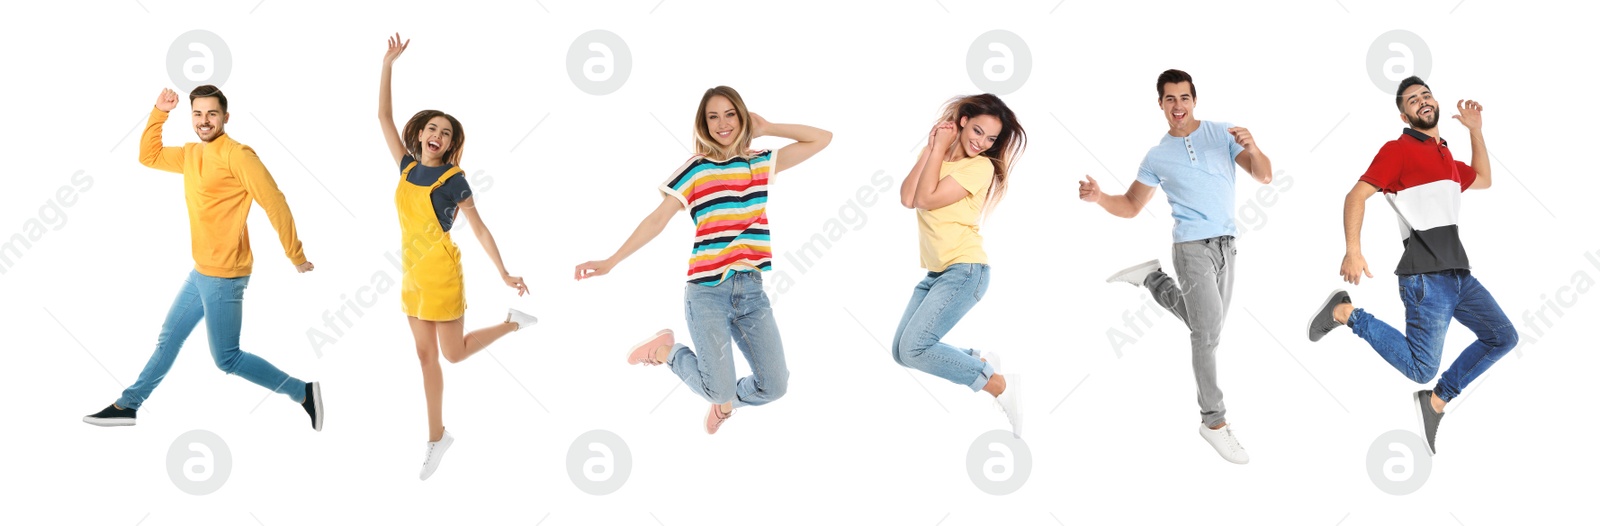 Image of Collage of emotional people wearing fashion clothes jumping on white background. Banner design